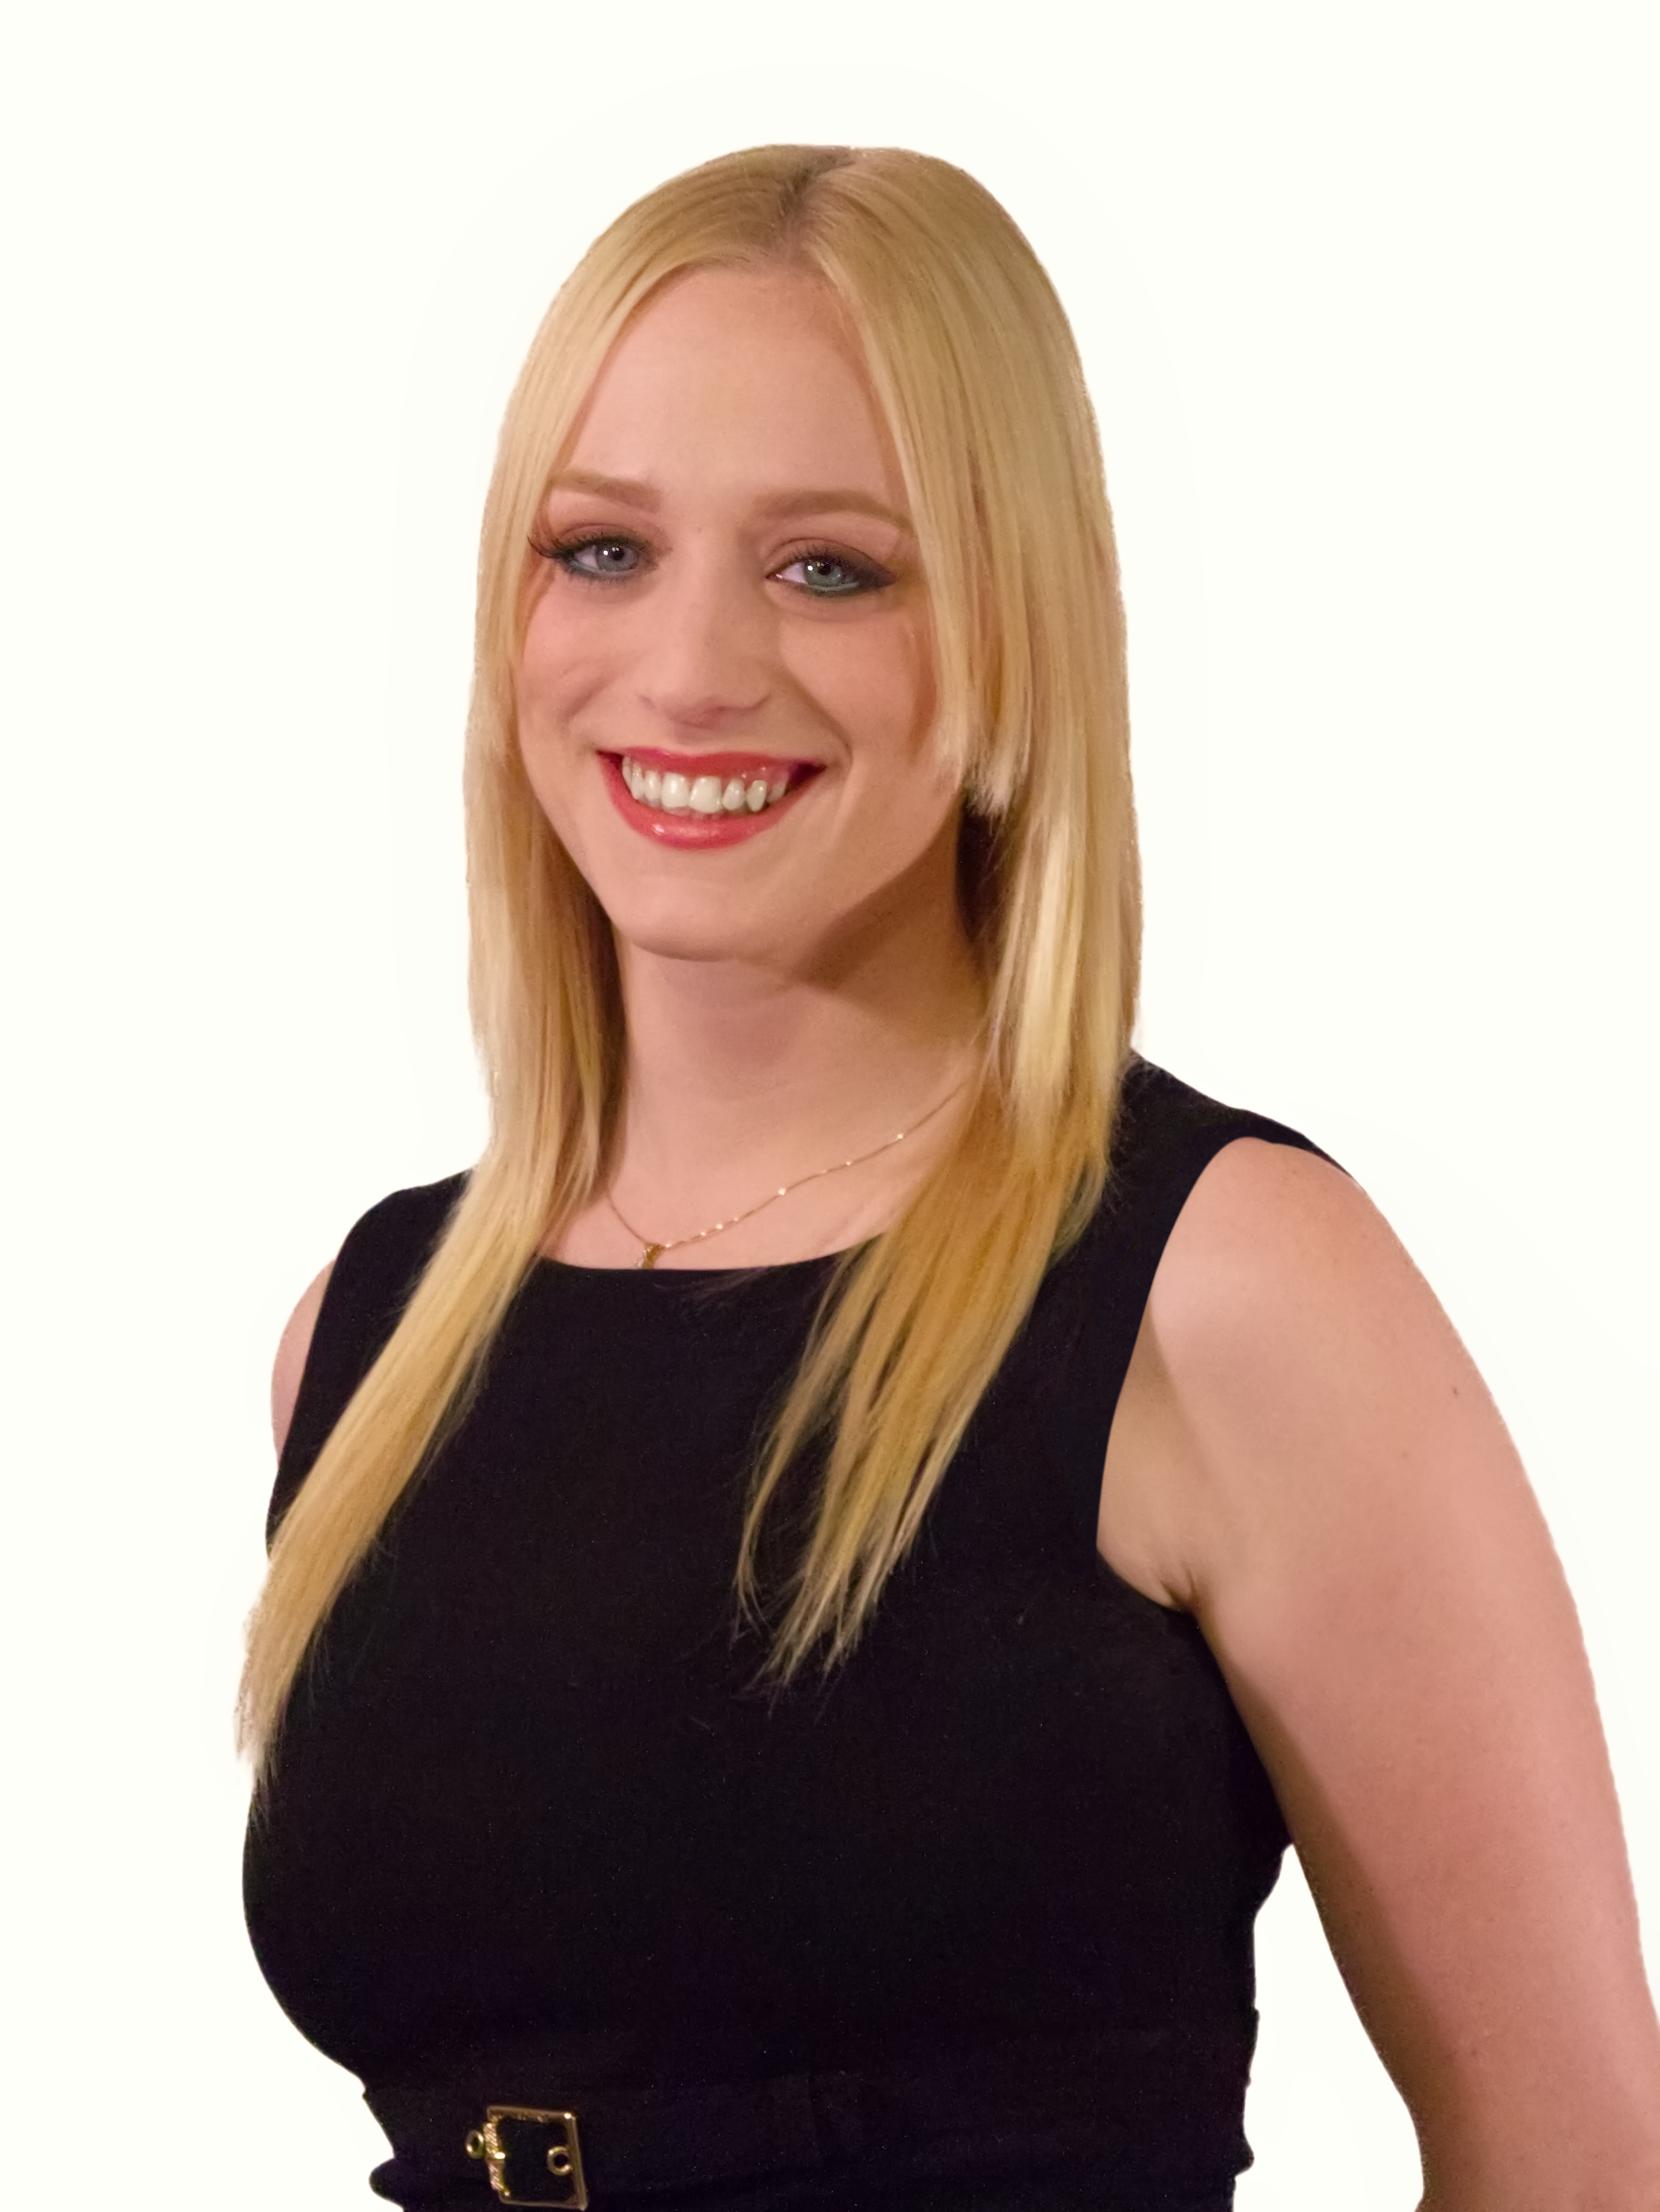  Meghan Perkins,  in Inverness, Dennis Realty & Investment Corp.